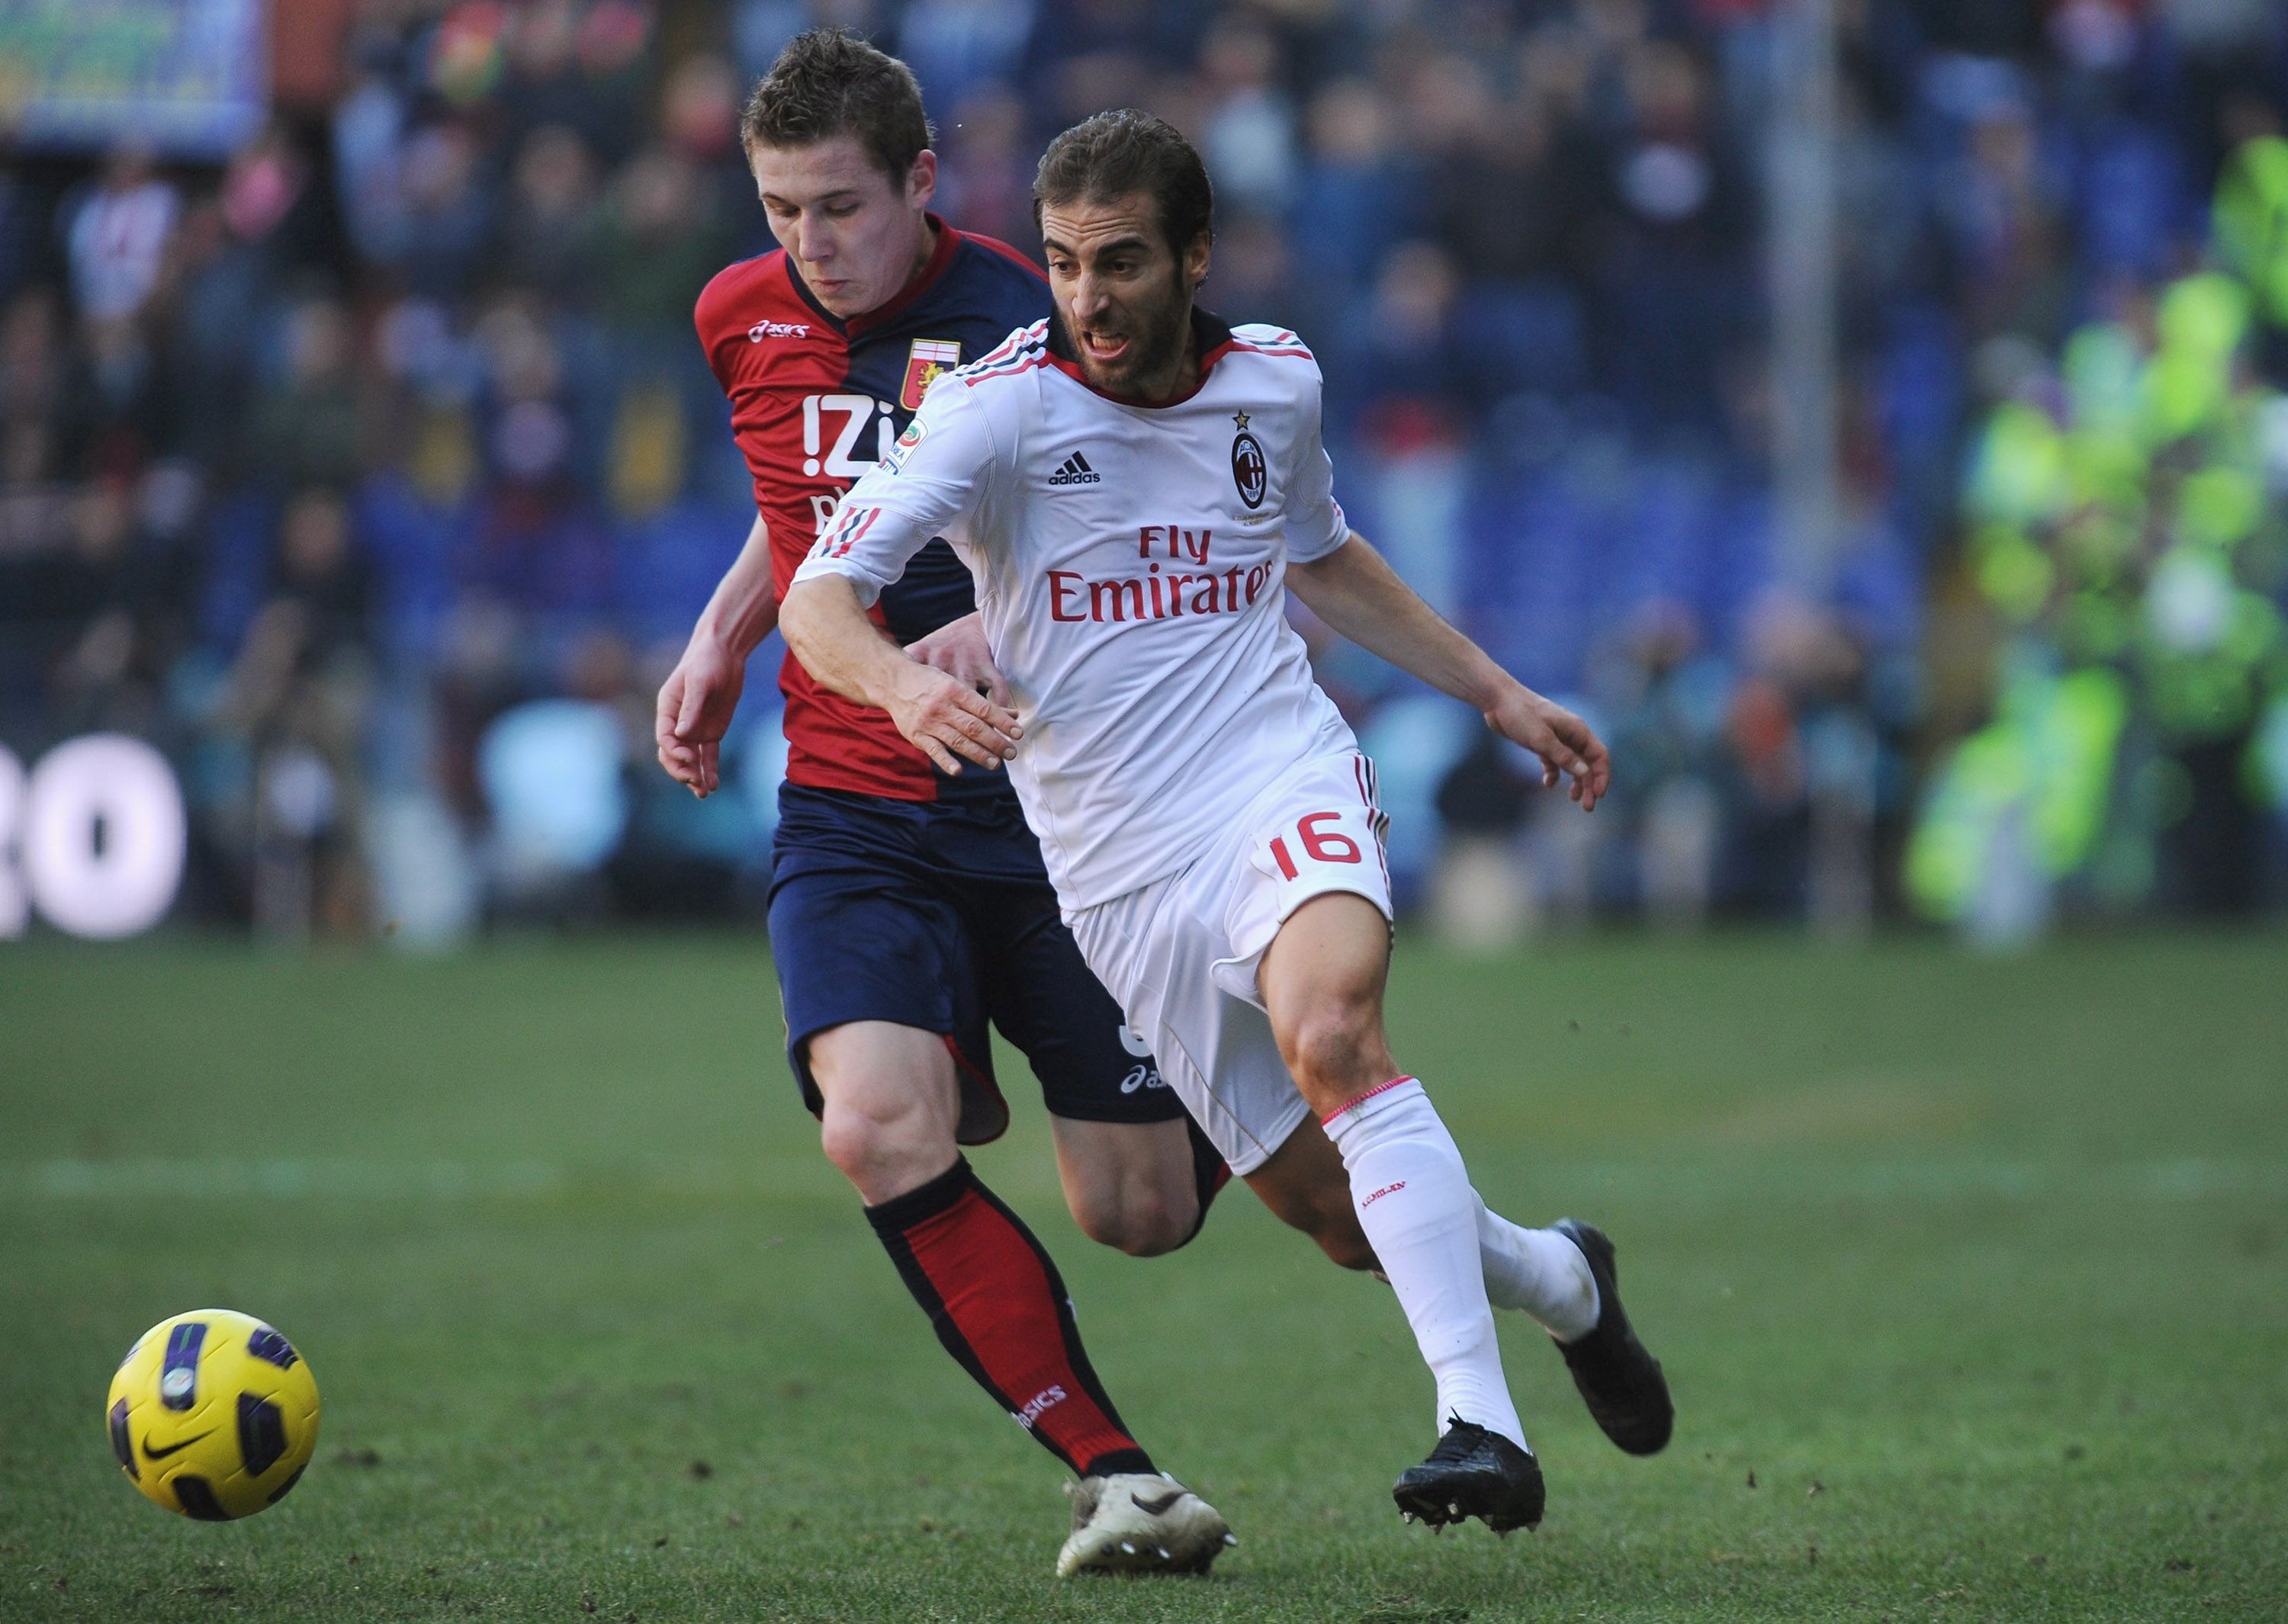 Flamini proved his worth for Milan